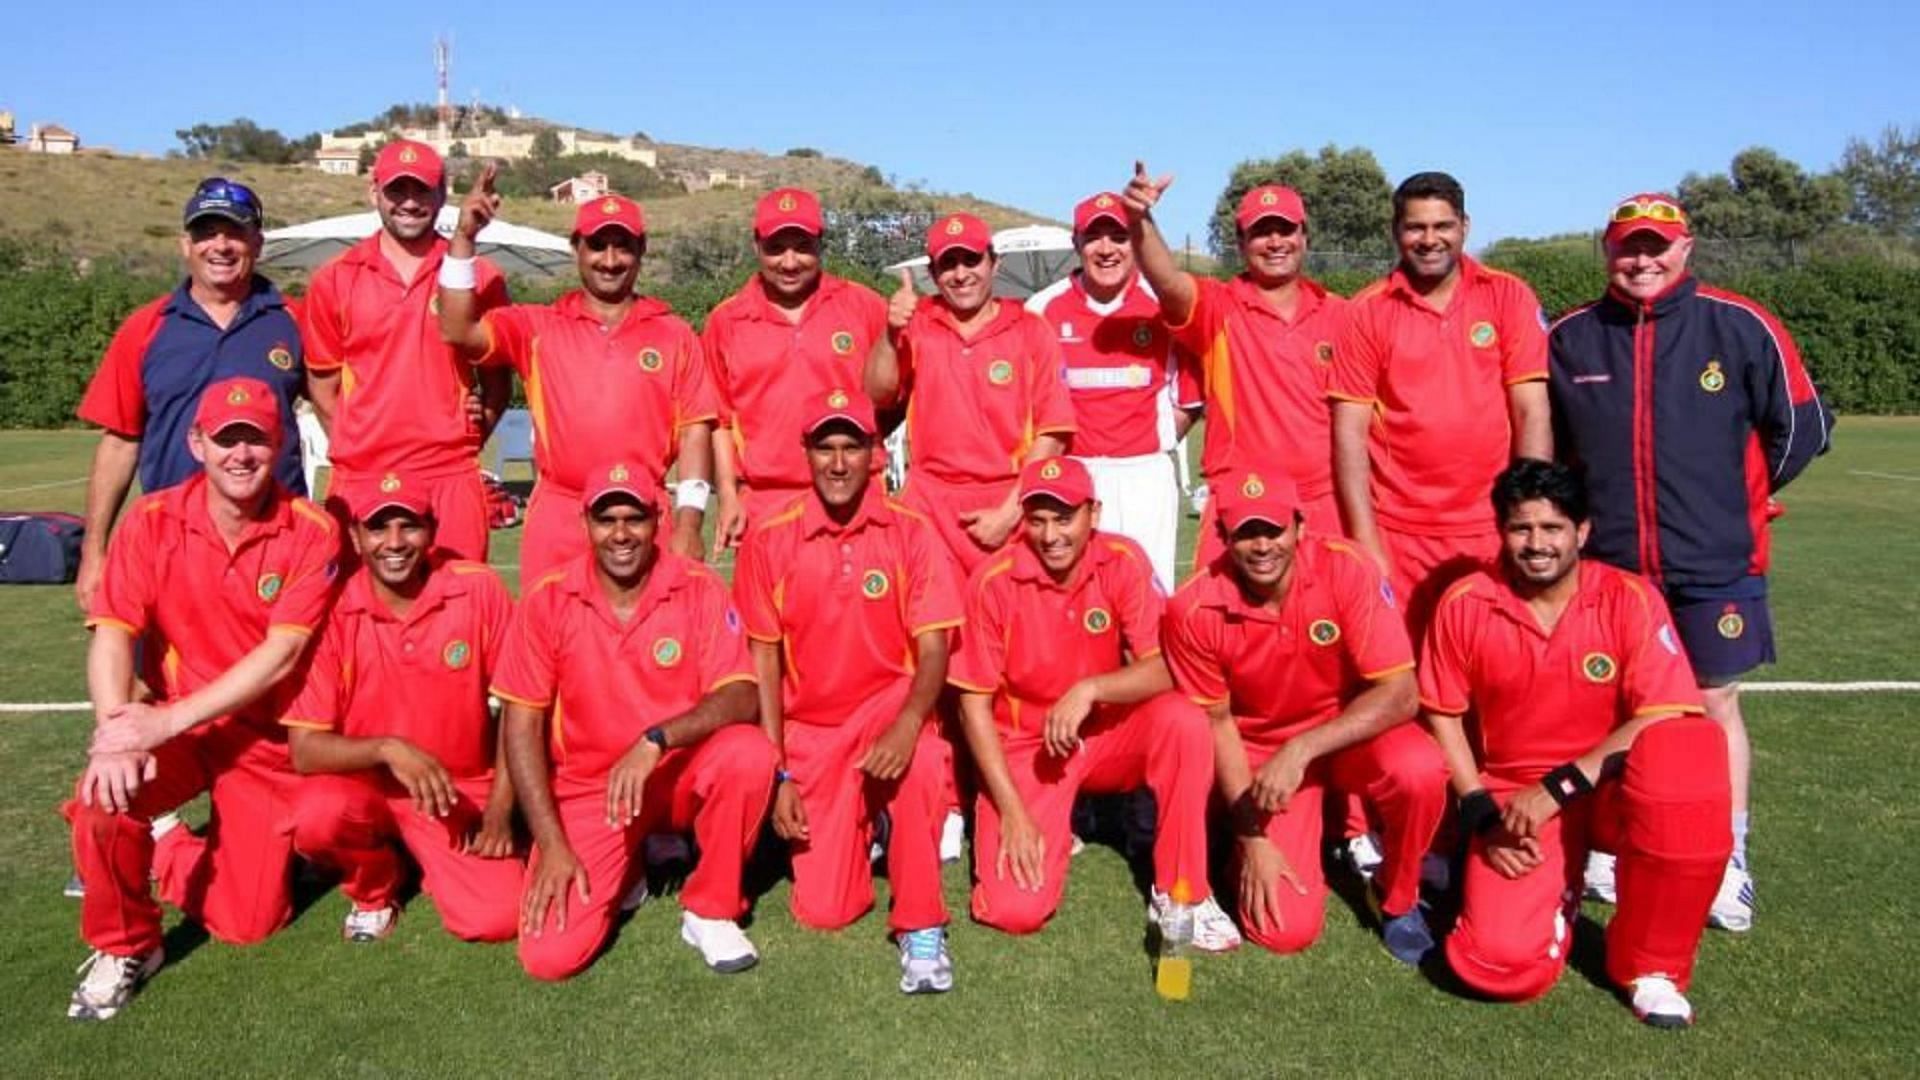 Spain Cricket Team in action (Image Courtesy: International Cricket Council)